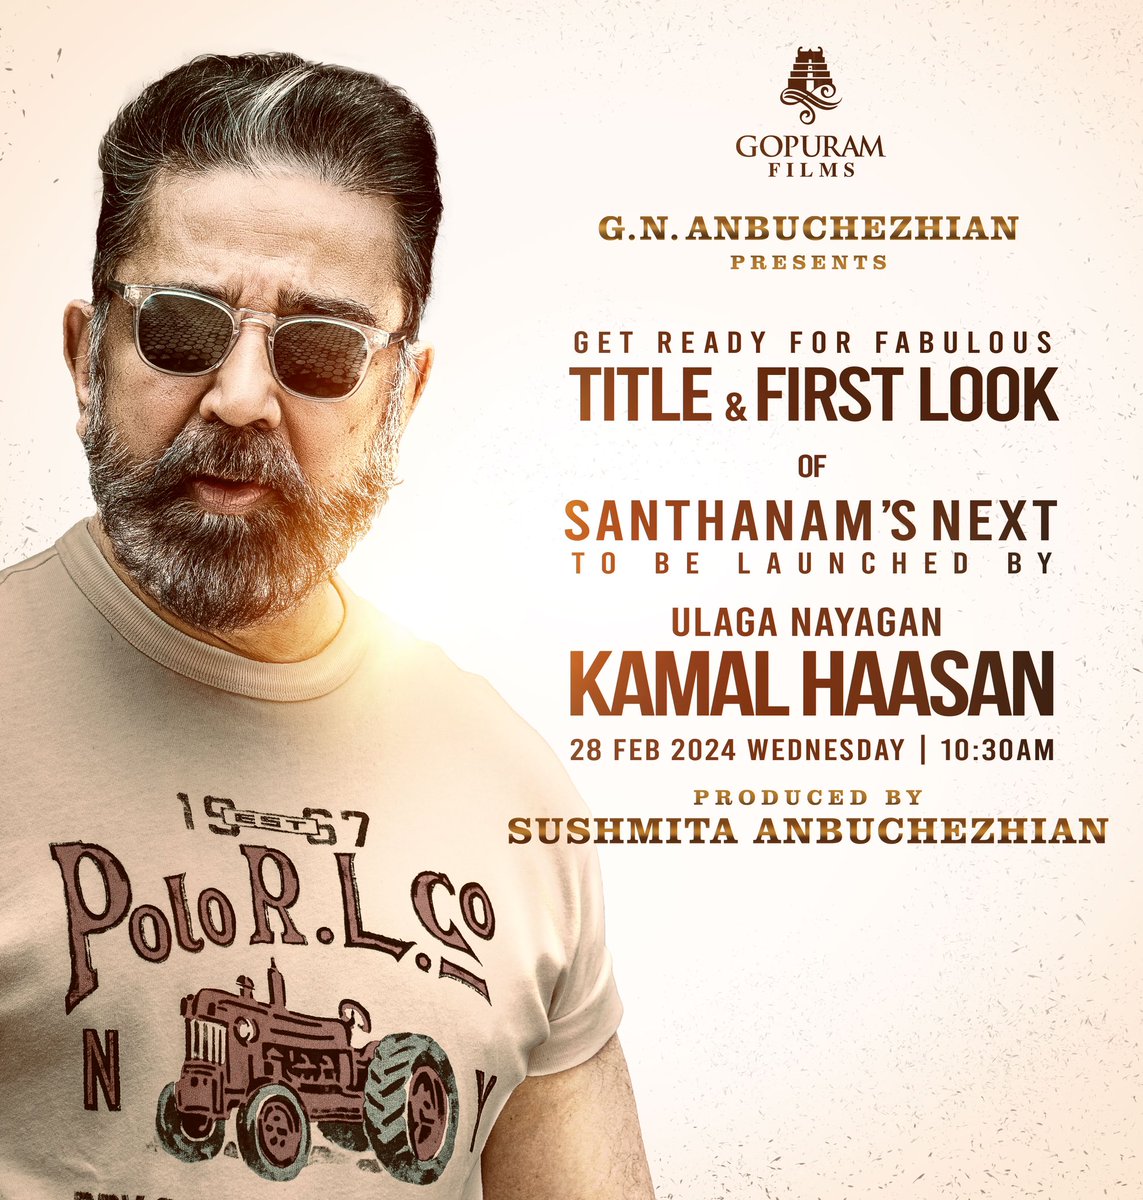 Excitement at its PEAK💥 The Title & First Look of my next will be released by the connoisseur of Indian Cinema🤩 #Ulaganayagan @ikamalhaasan sir 😇 Tomorrow(28th Feb) at 10:30 AM🔥 Presented by the One & Only @gopuramfilms #GNAnbuchezhian sir, Produced by #SushmitaAnbuchezhian